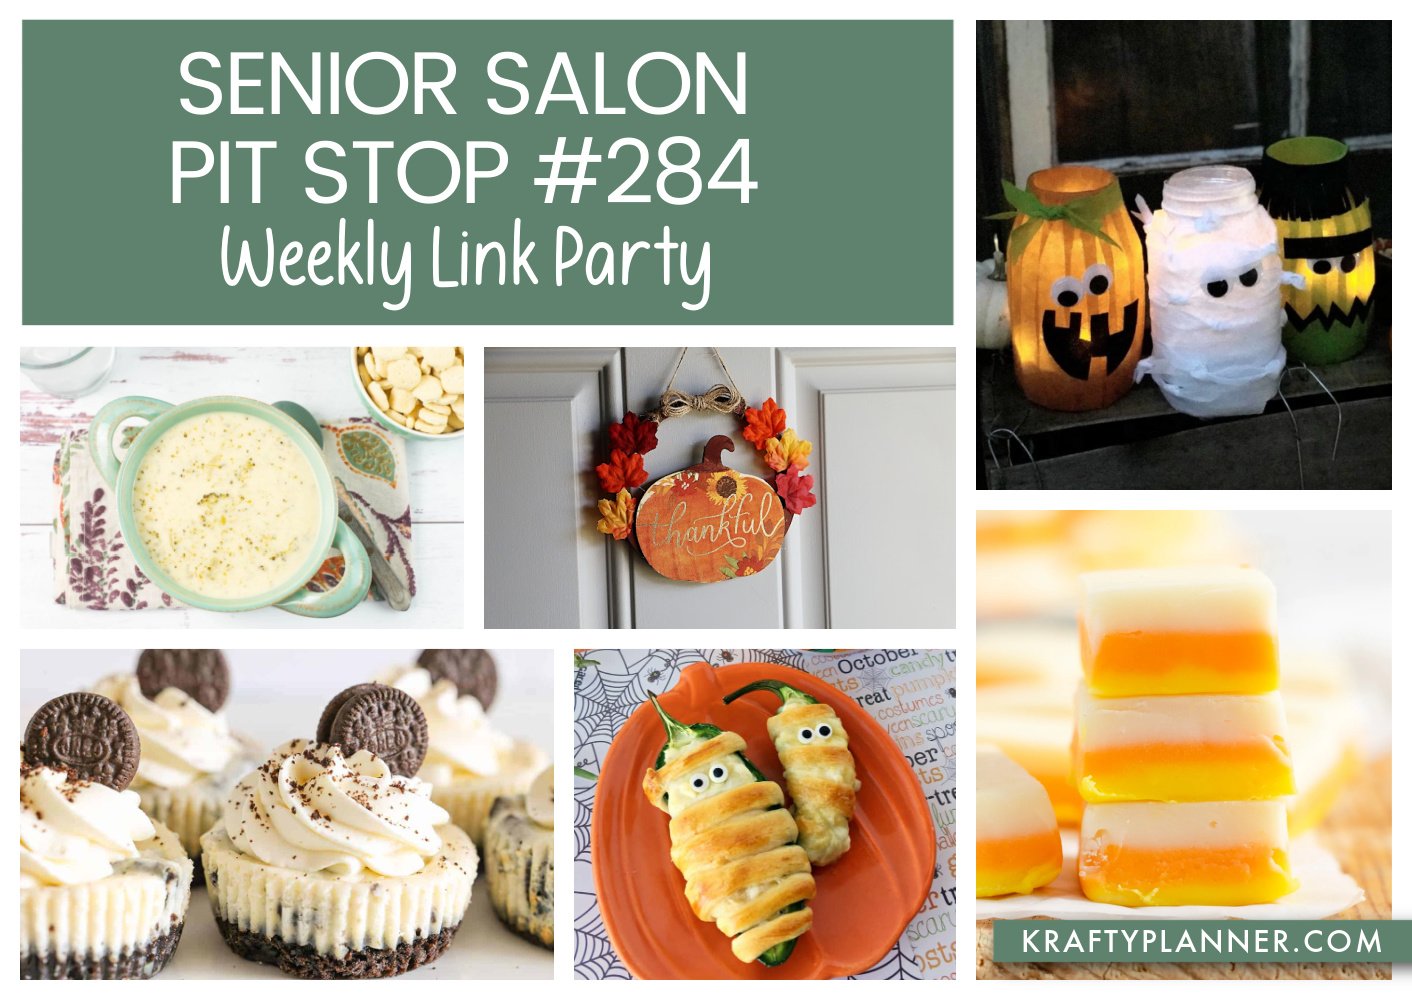 Senior Salon Pit Stop Weekly Link Party #284